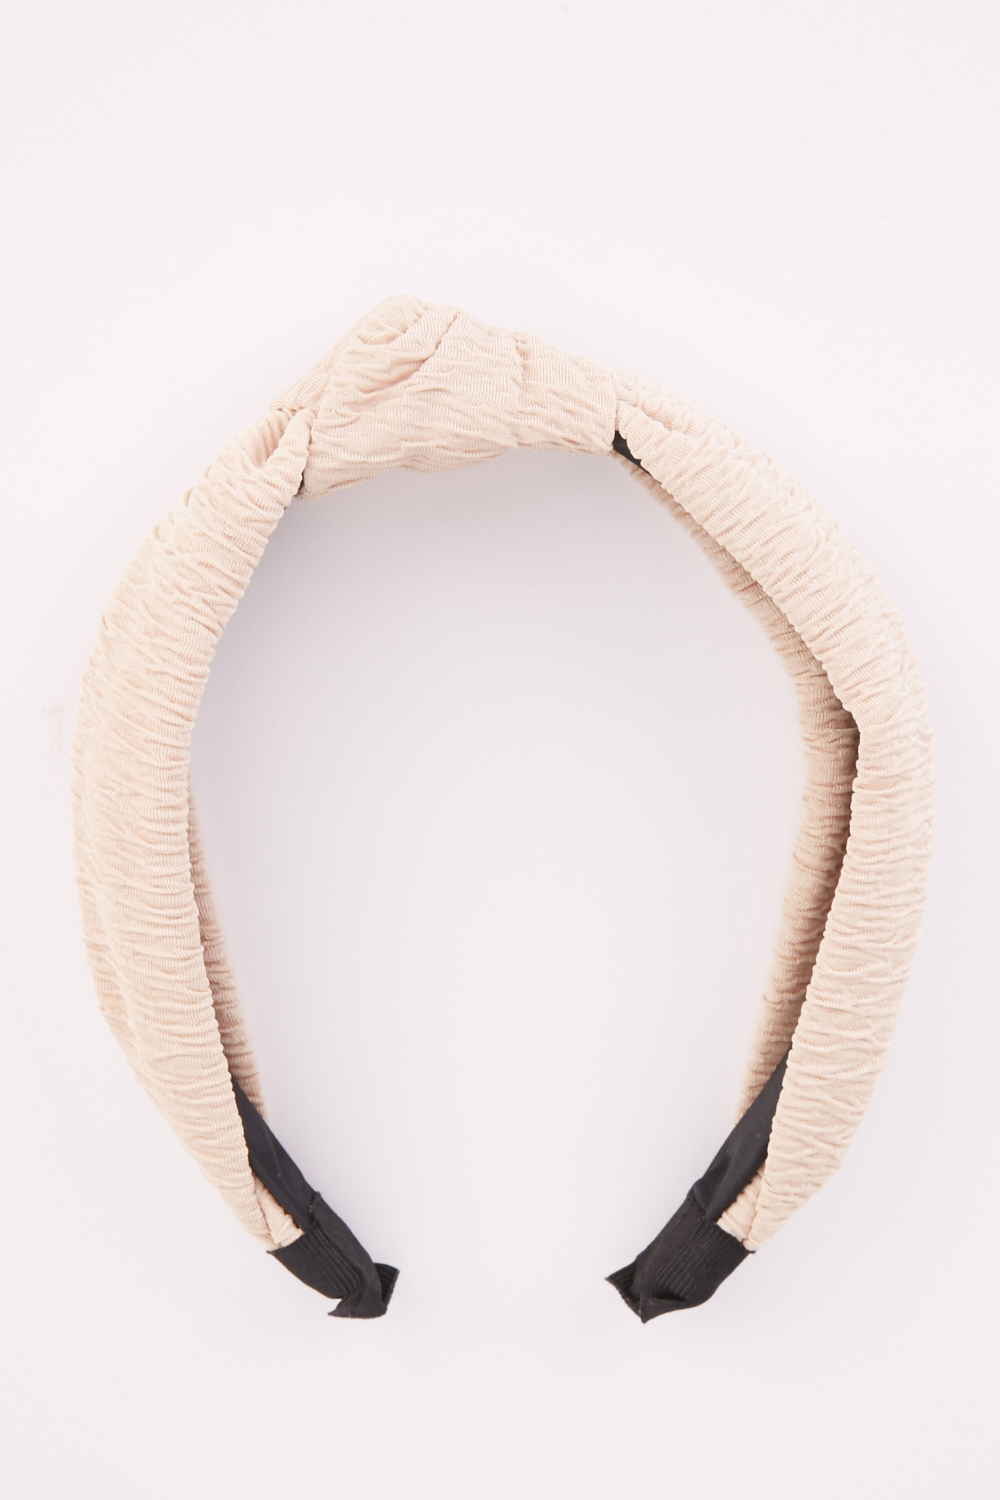 Ruched Knotted Headband